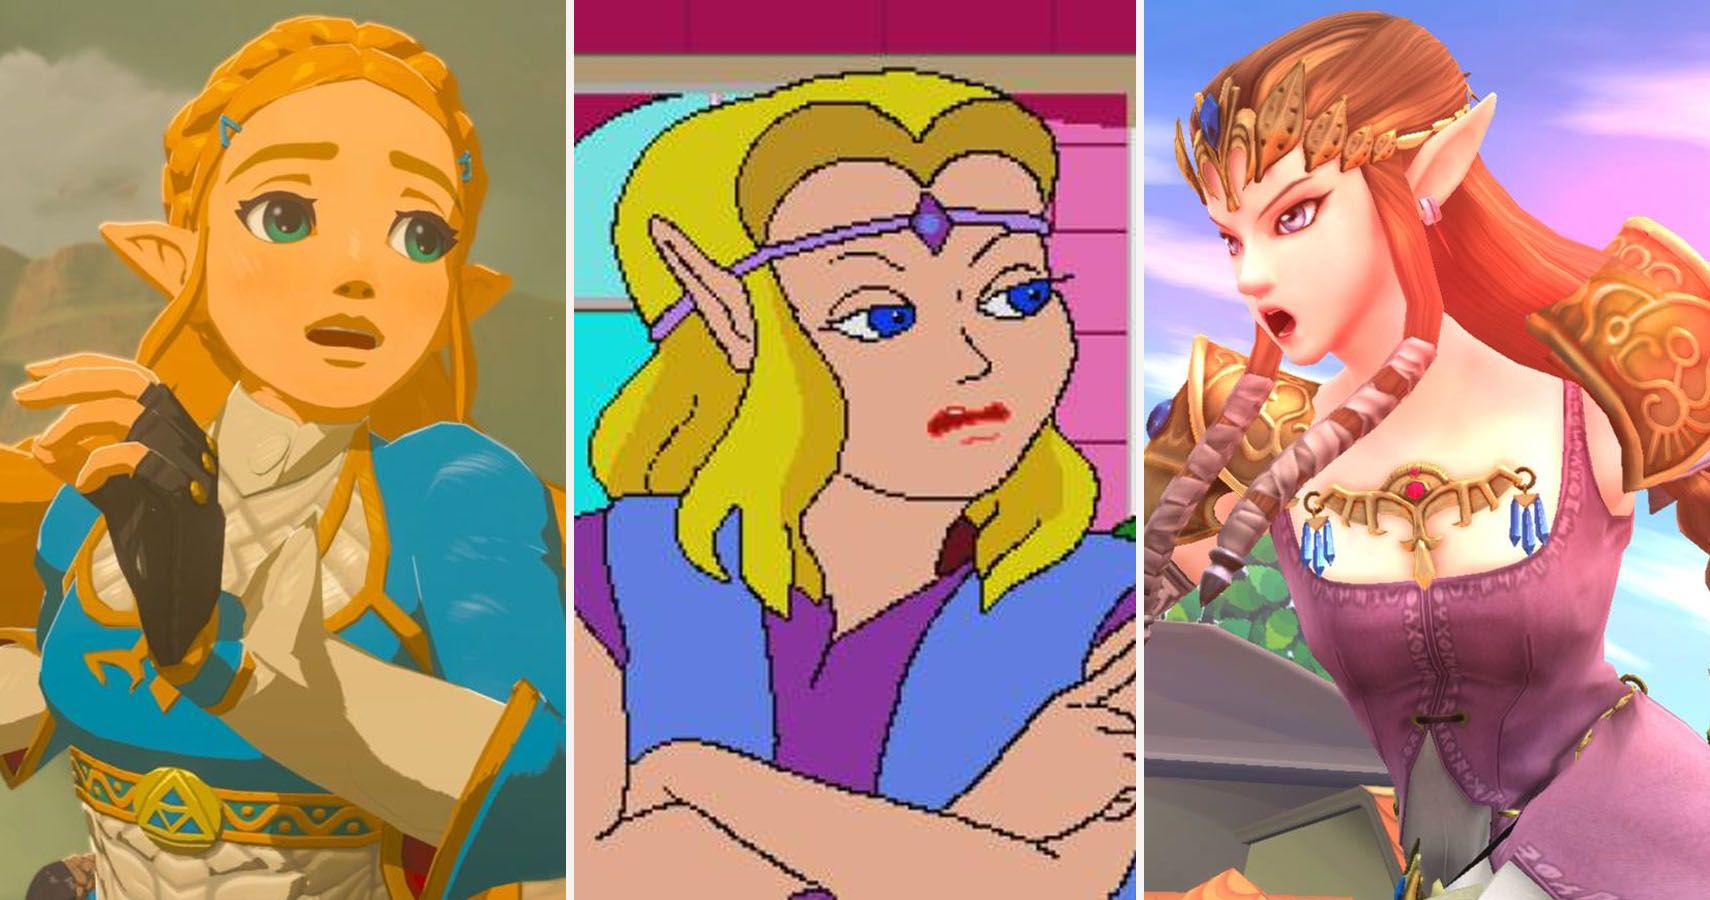 The Legend Of Zelda Series Ranked From Worst To Best